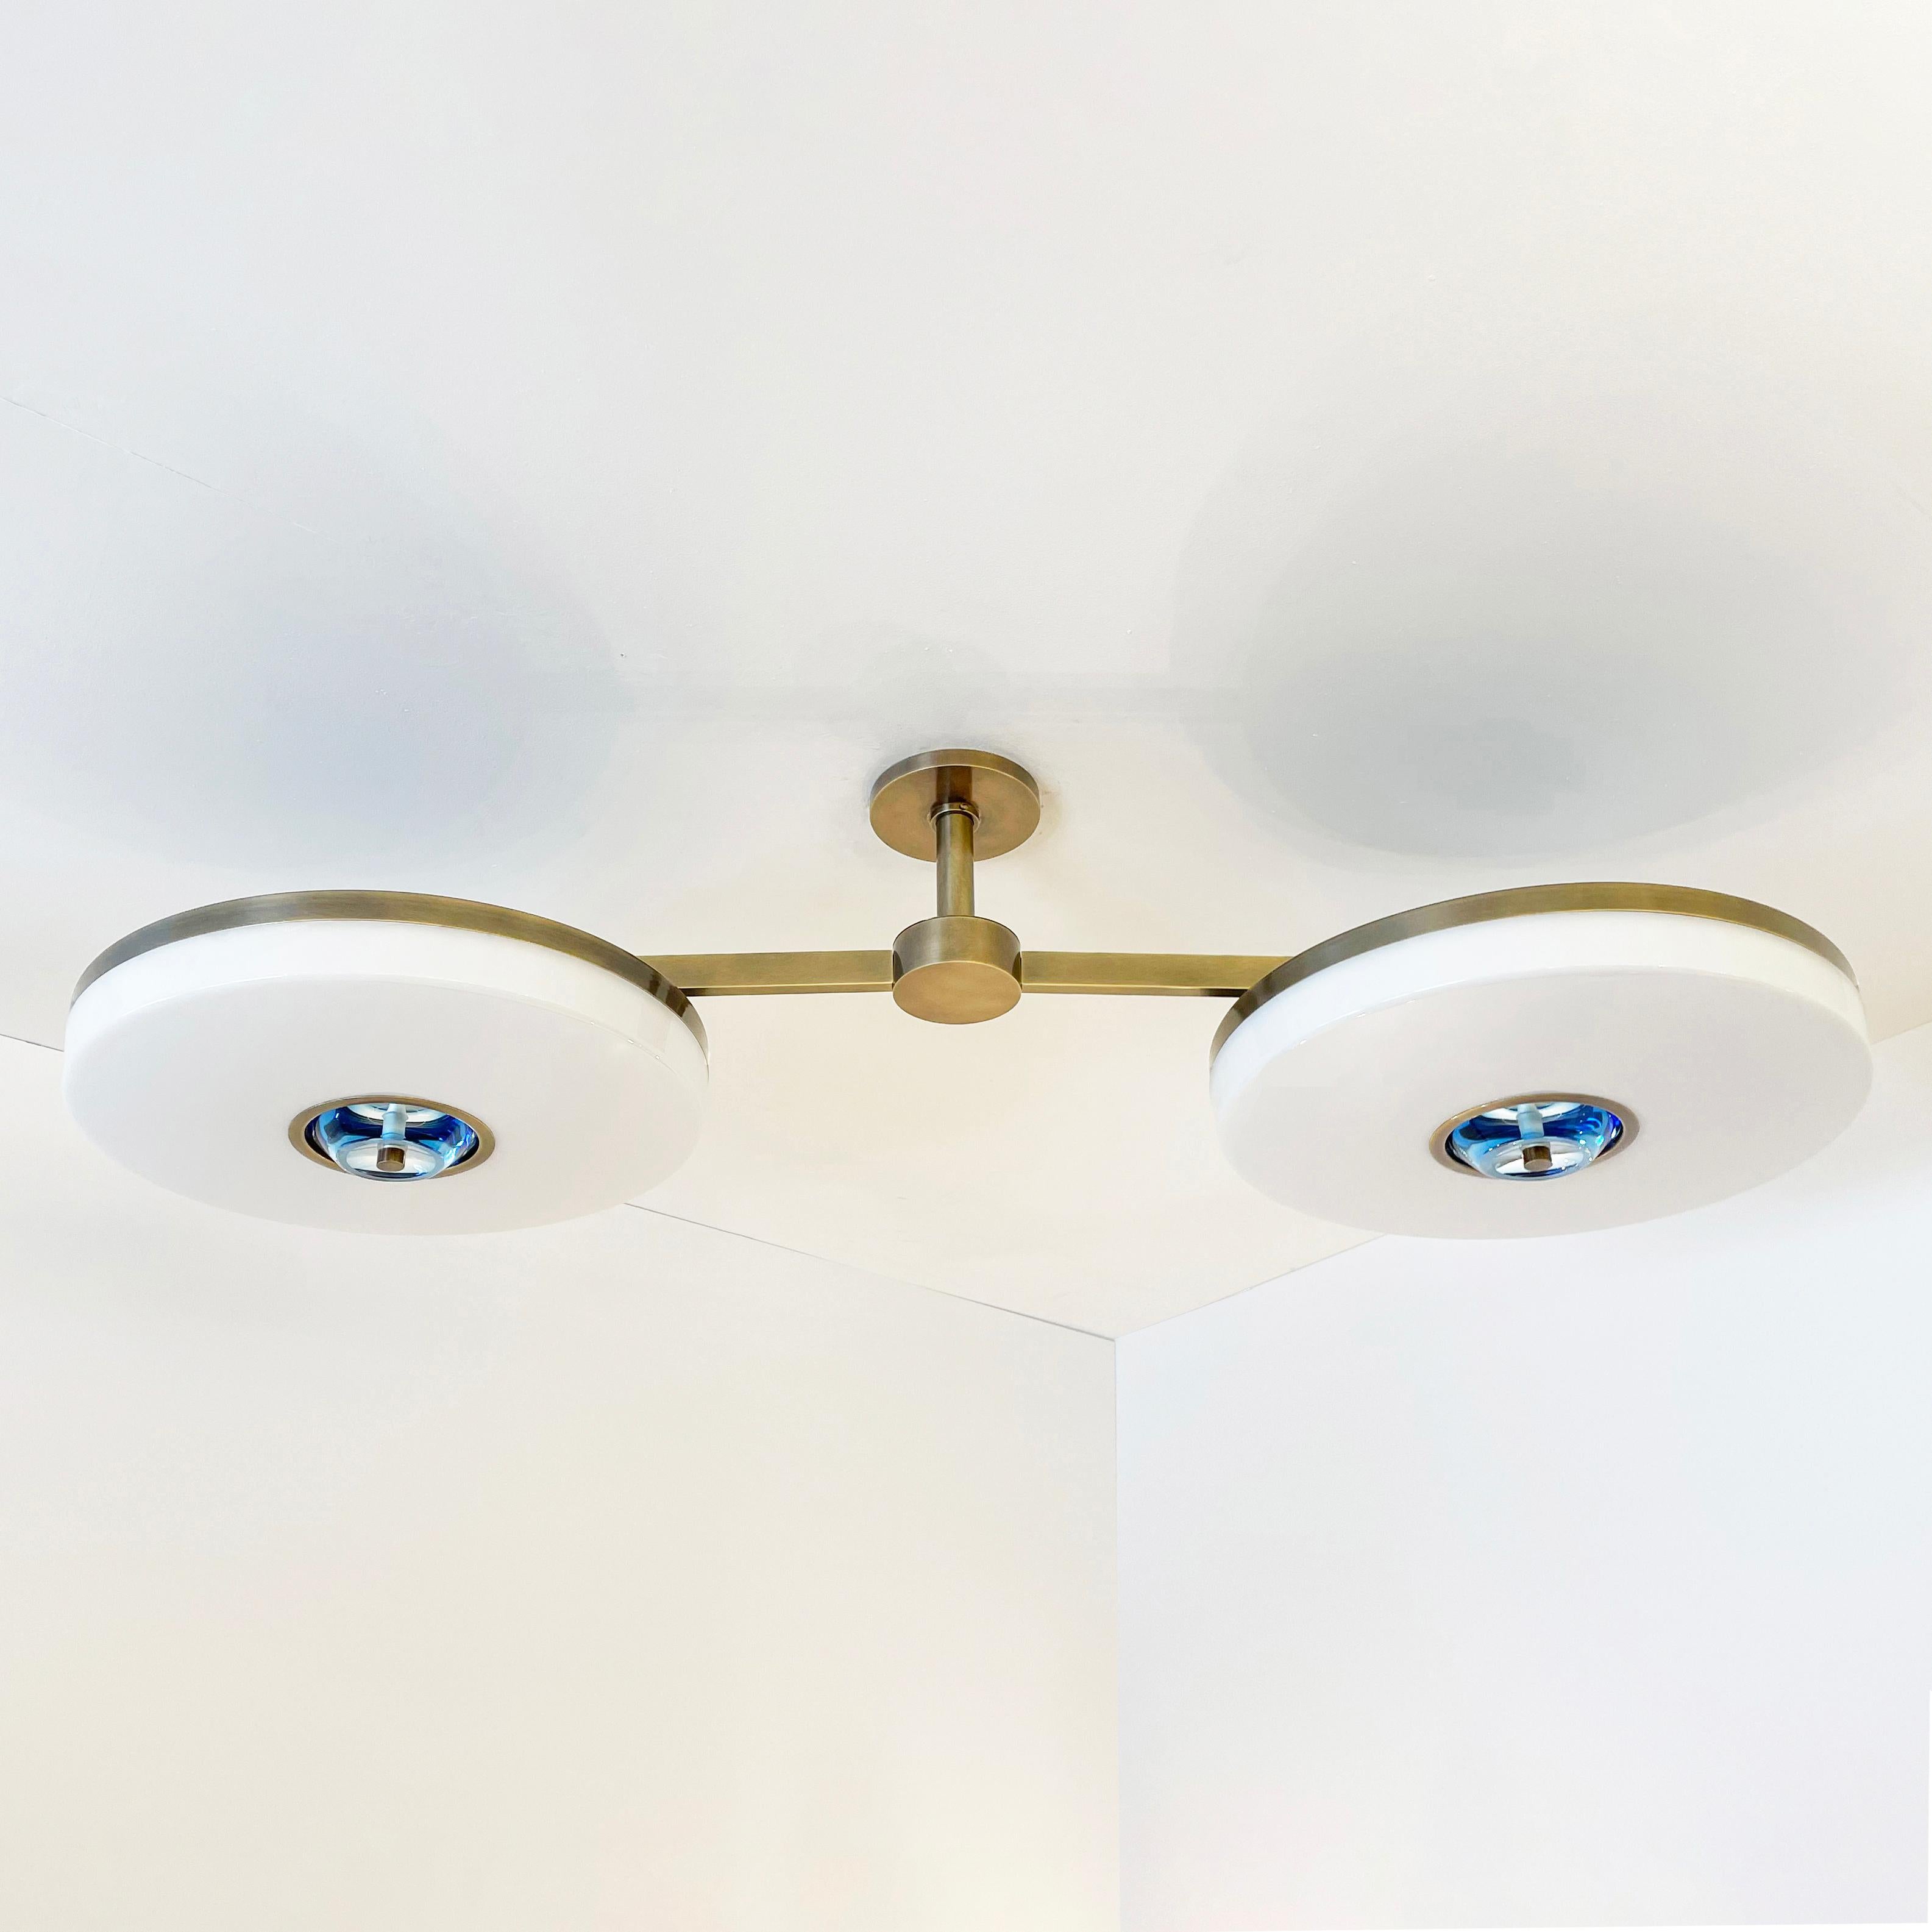 Italian Iris N. 2 Ceiling Light by Gaspare Asaro For Sale